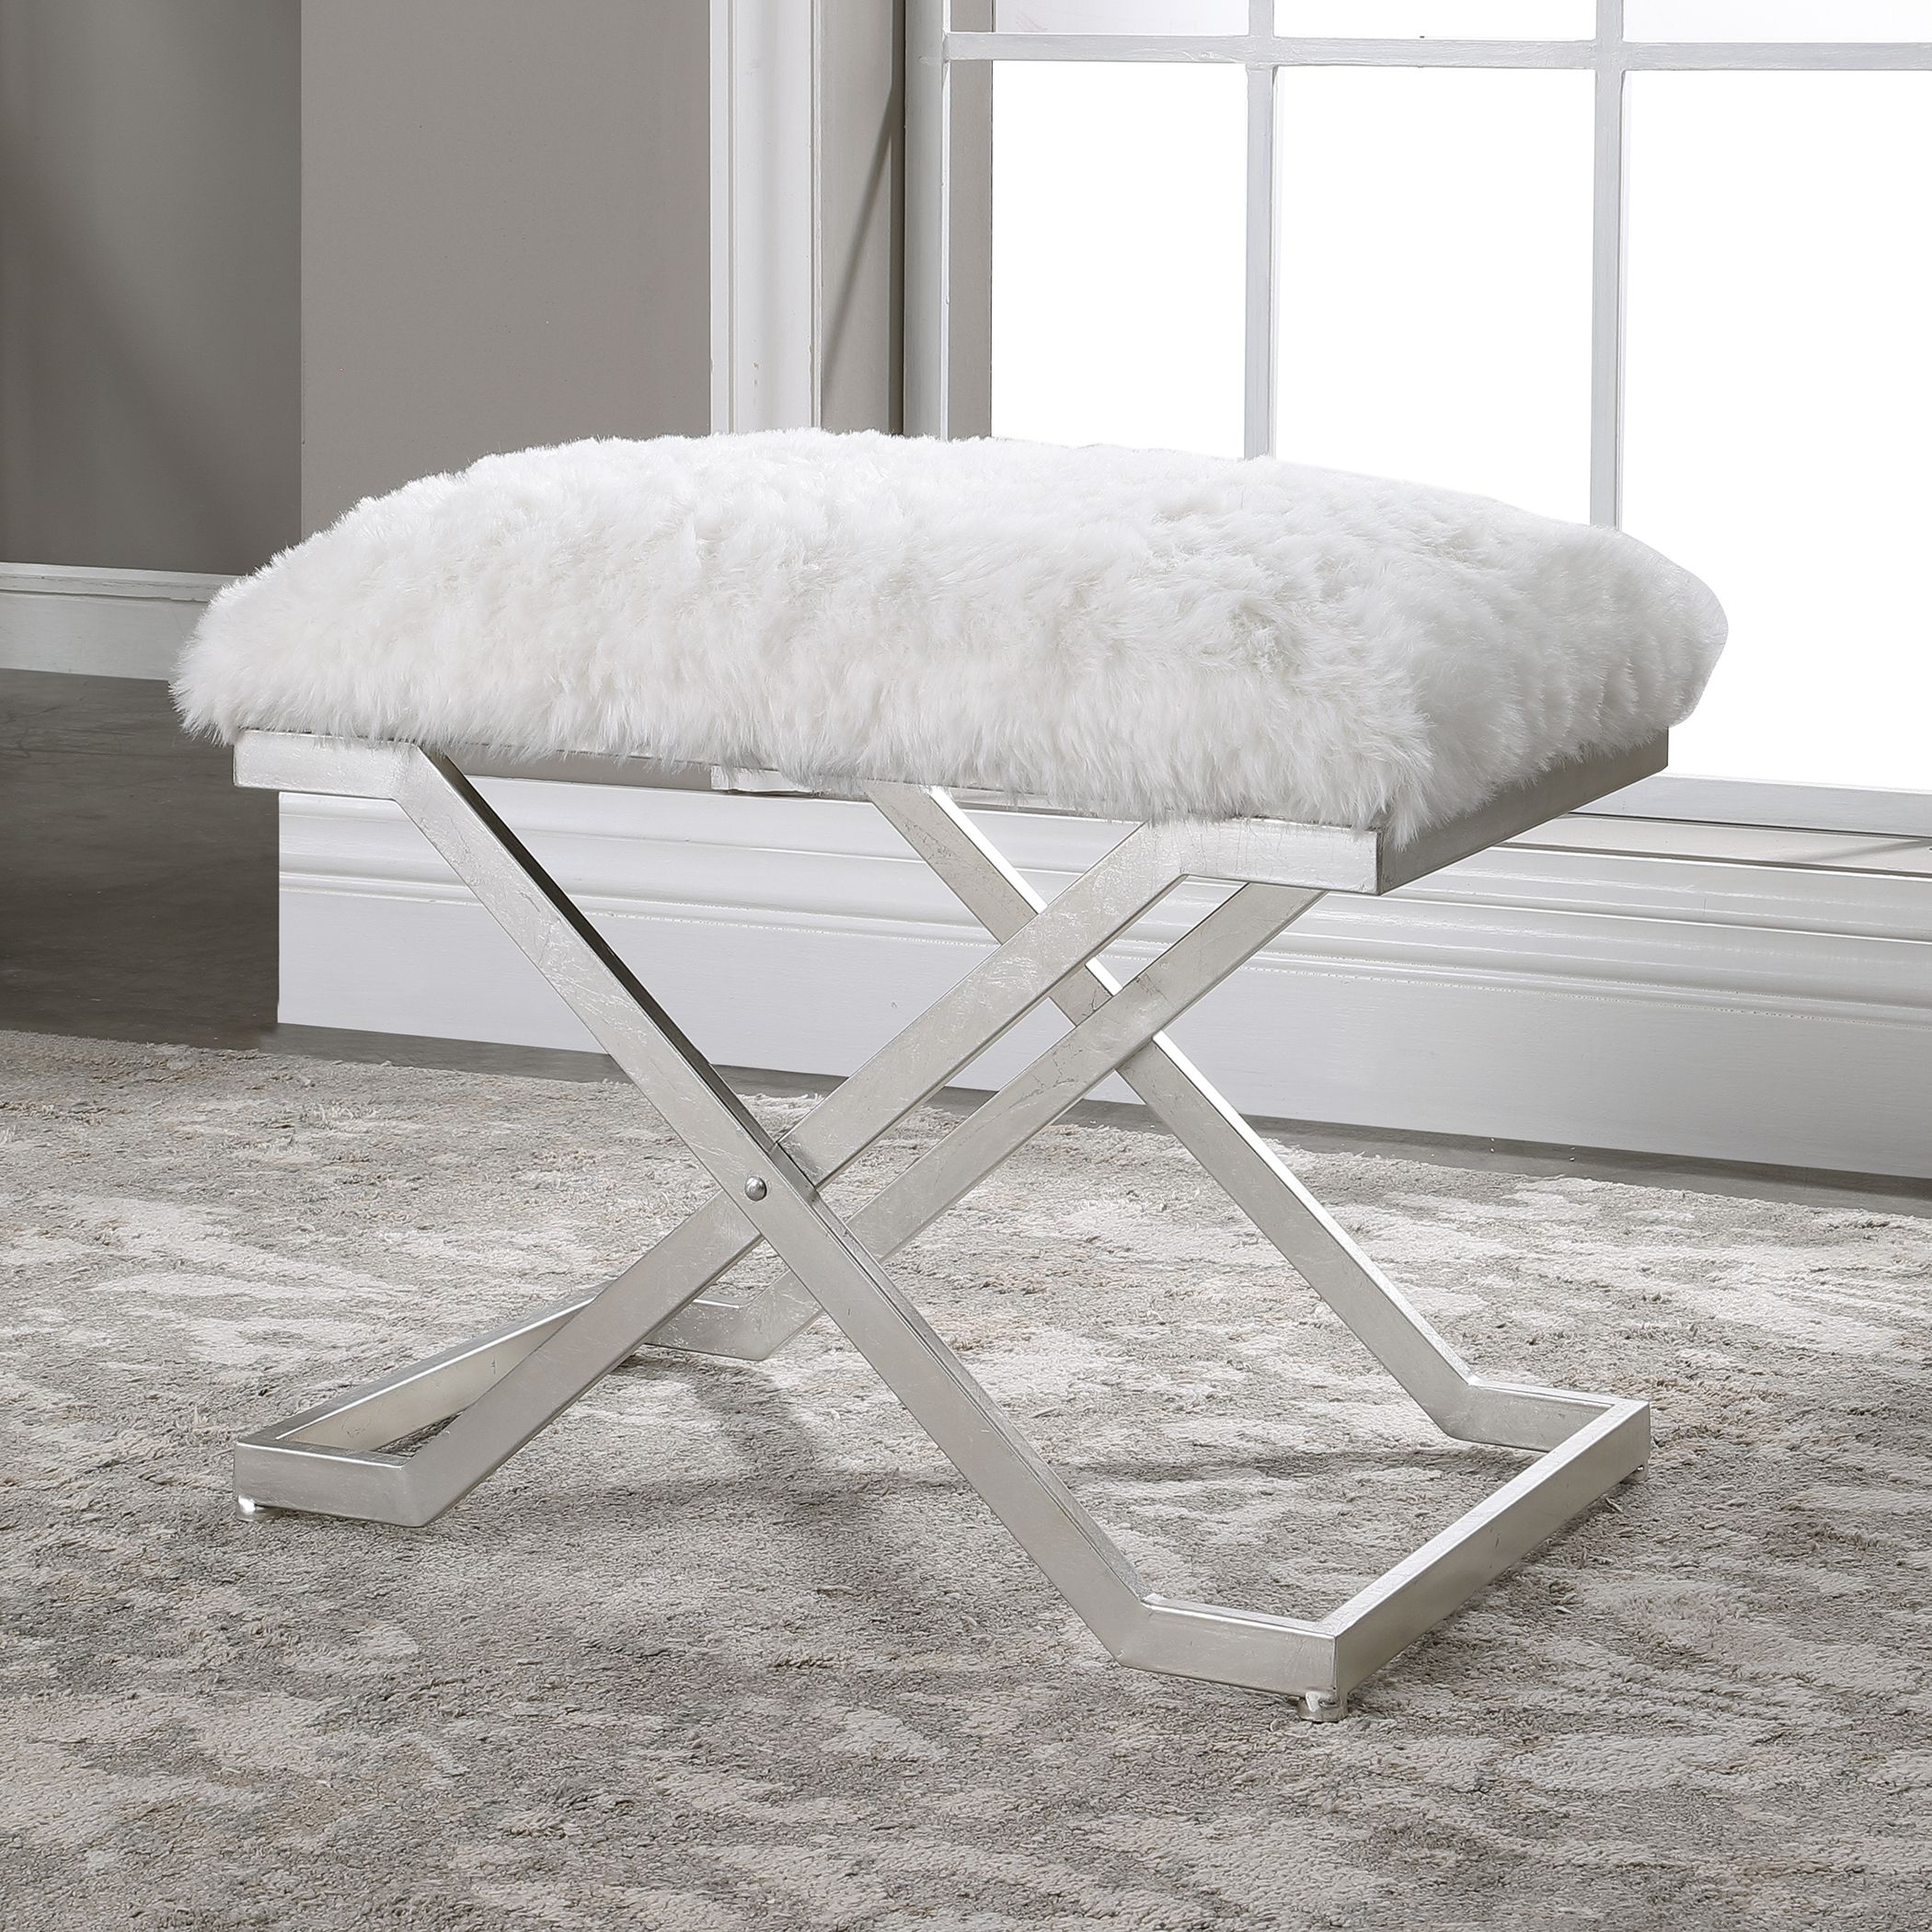 Fashionable Glam Plush Faux Fur Shaggy White Bench Ottoman Retro Contemporary Stool Inside White Faux Fur And Gold Metal Ottomans (View 6 of 10)